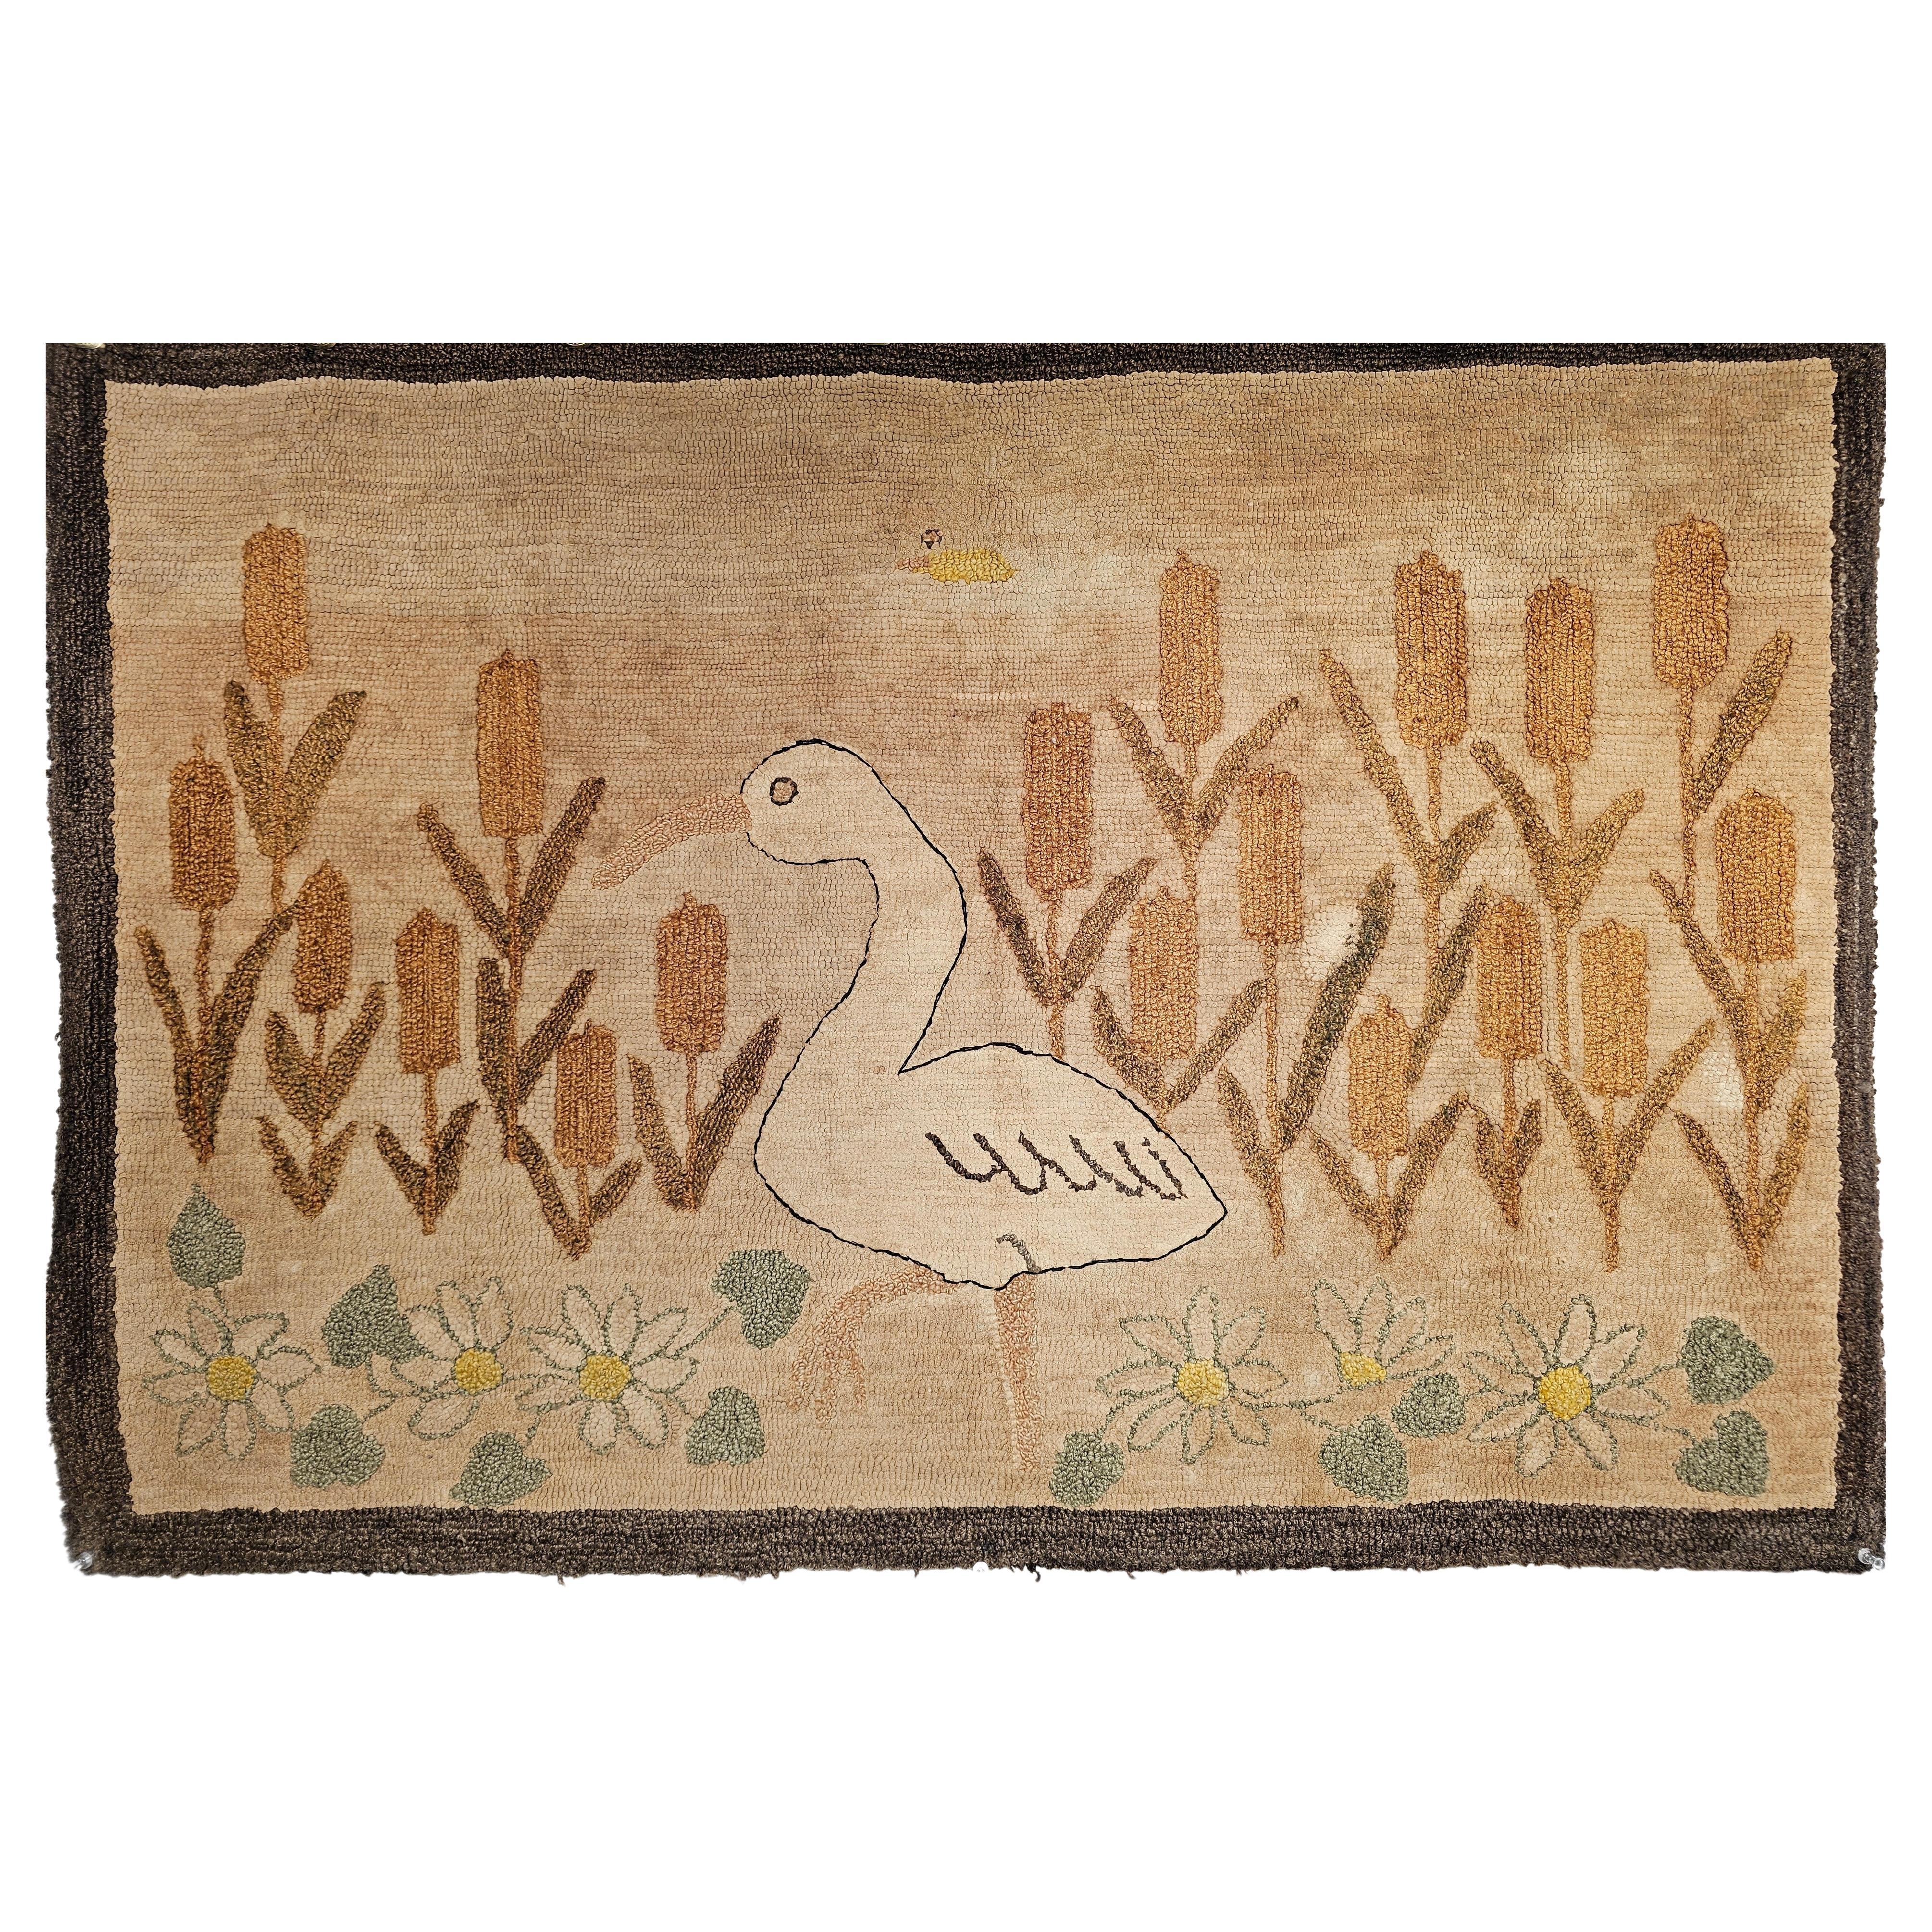 Early 20th Century American Hand Hooked Rug in a Bird and Flowers Design For Sale